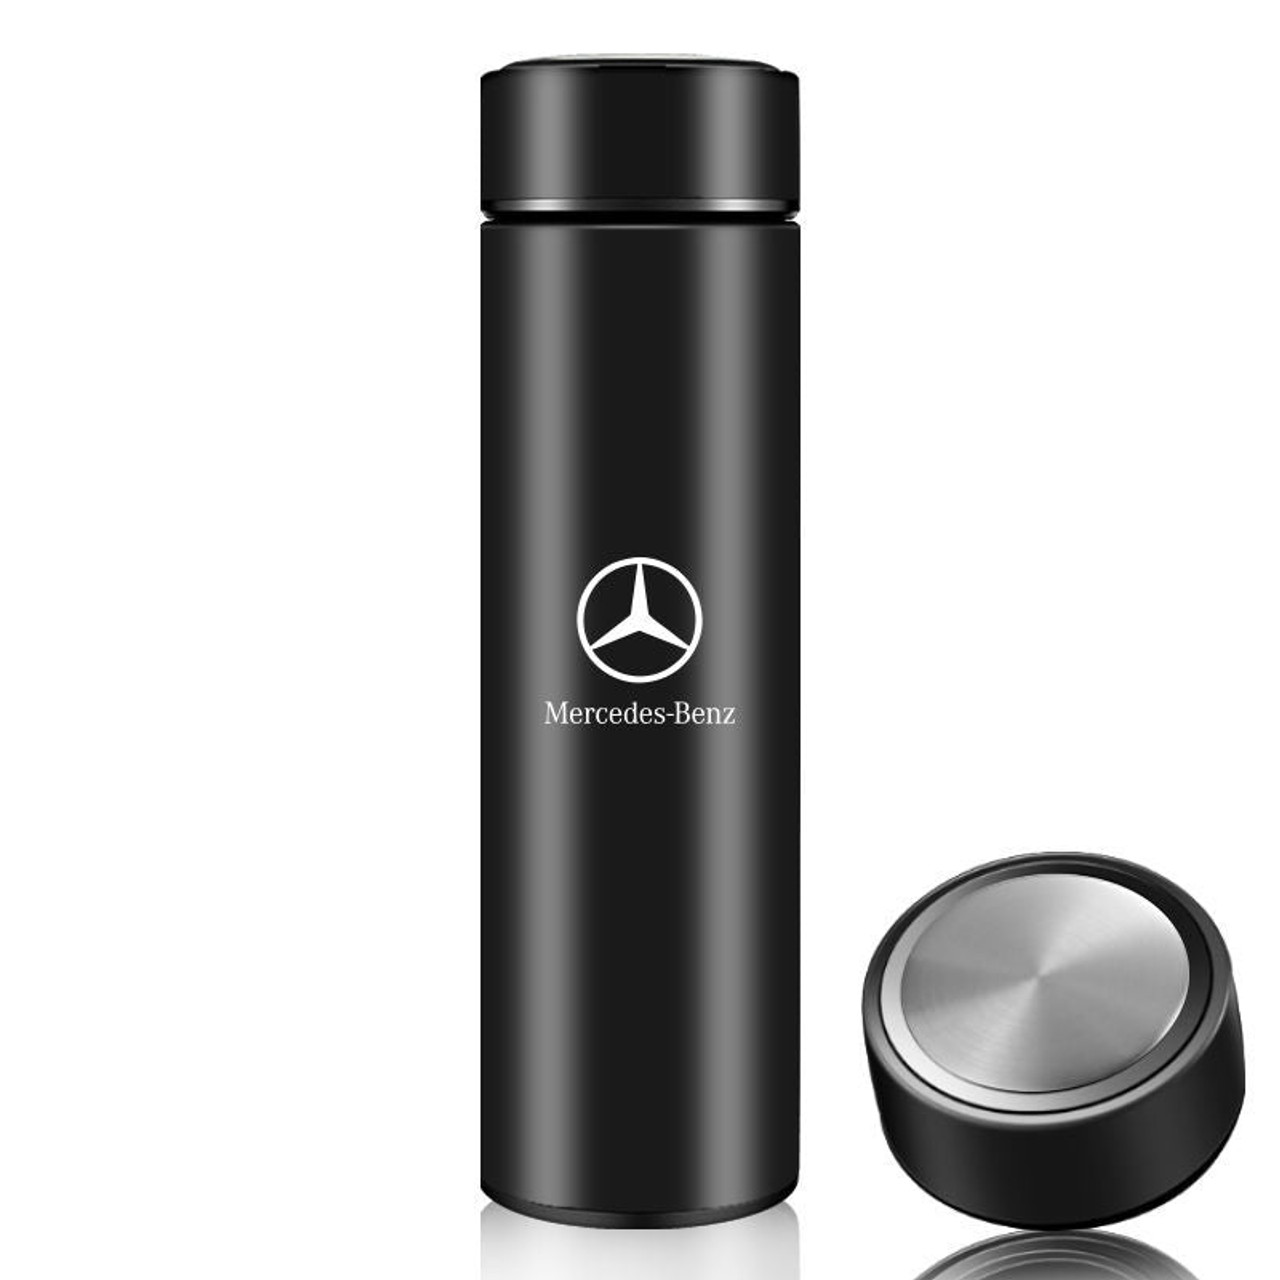 https://cdn11.bigcommerce.com/s-ktdamhfv2f/images/stencil/1280x1280/products/9143/40186/mercedes-benz-thermos-bottle-37007442575613__83718.1673592186.jpg?c=1